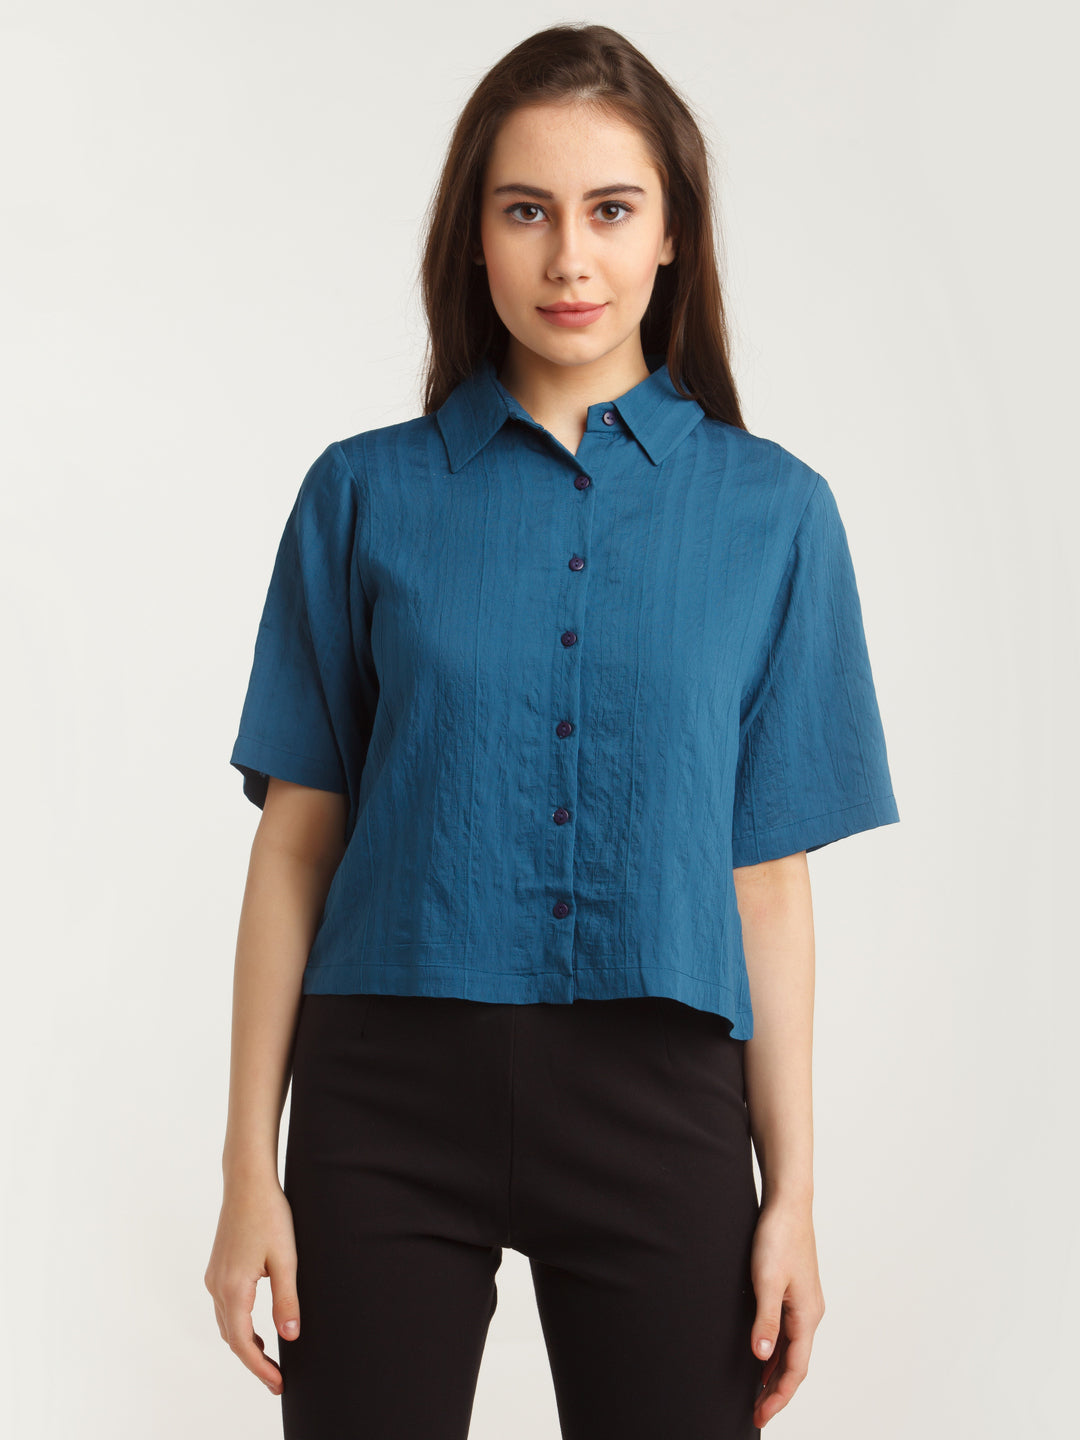 Navy Blue Solid Shirt For Women